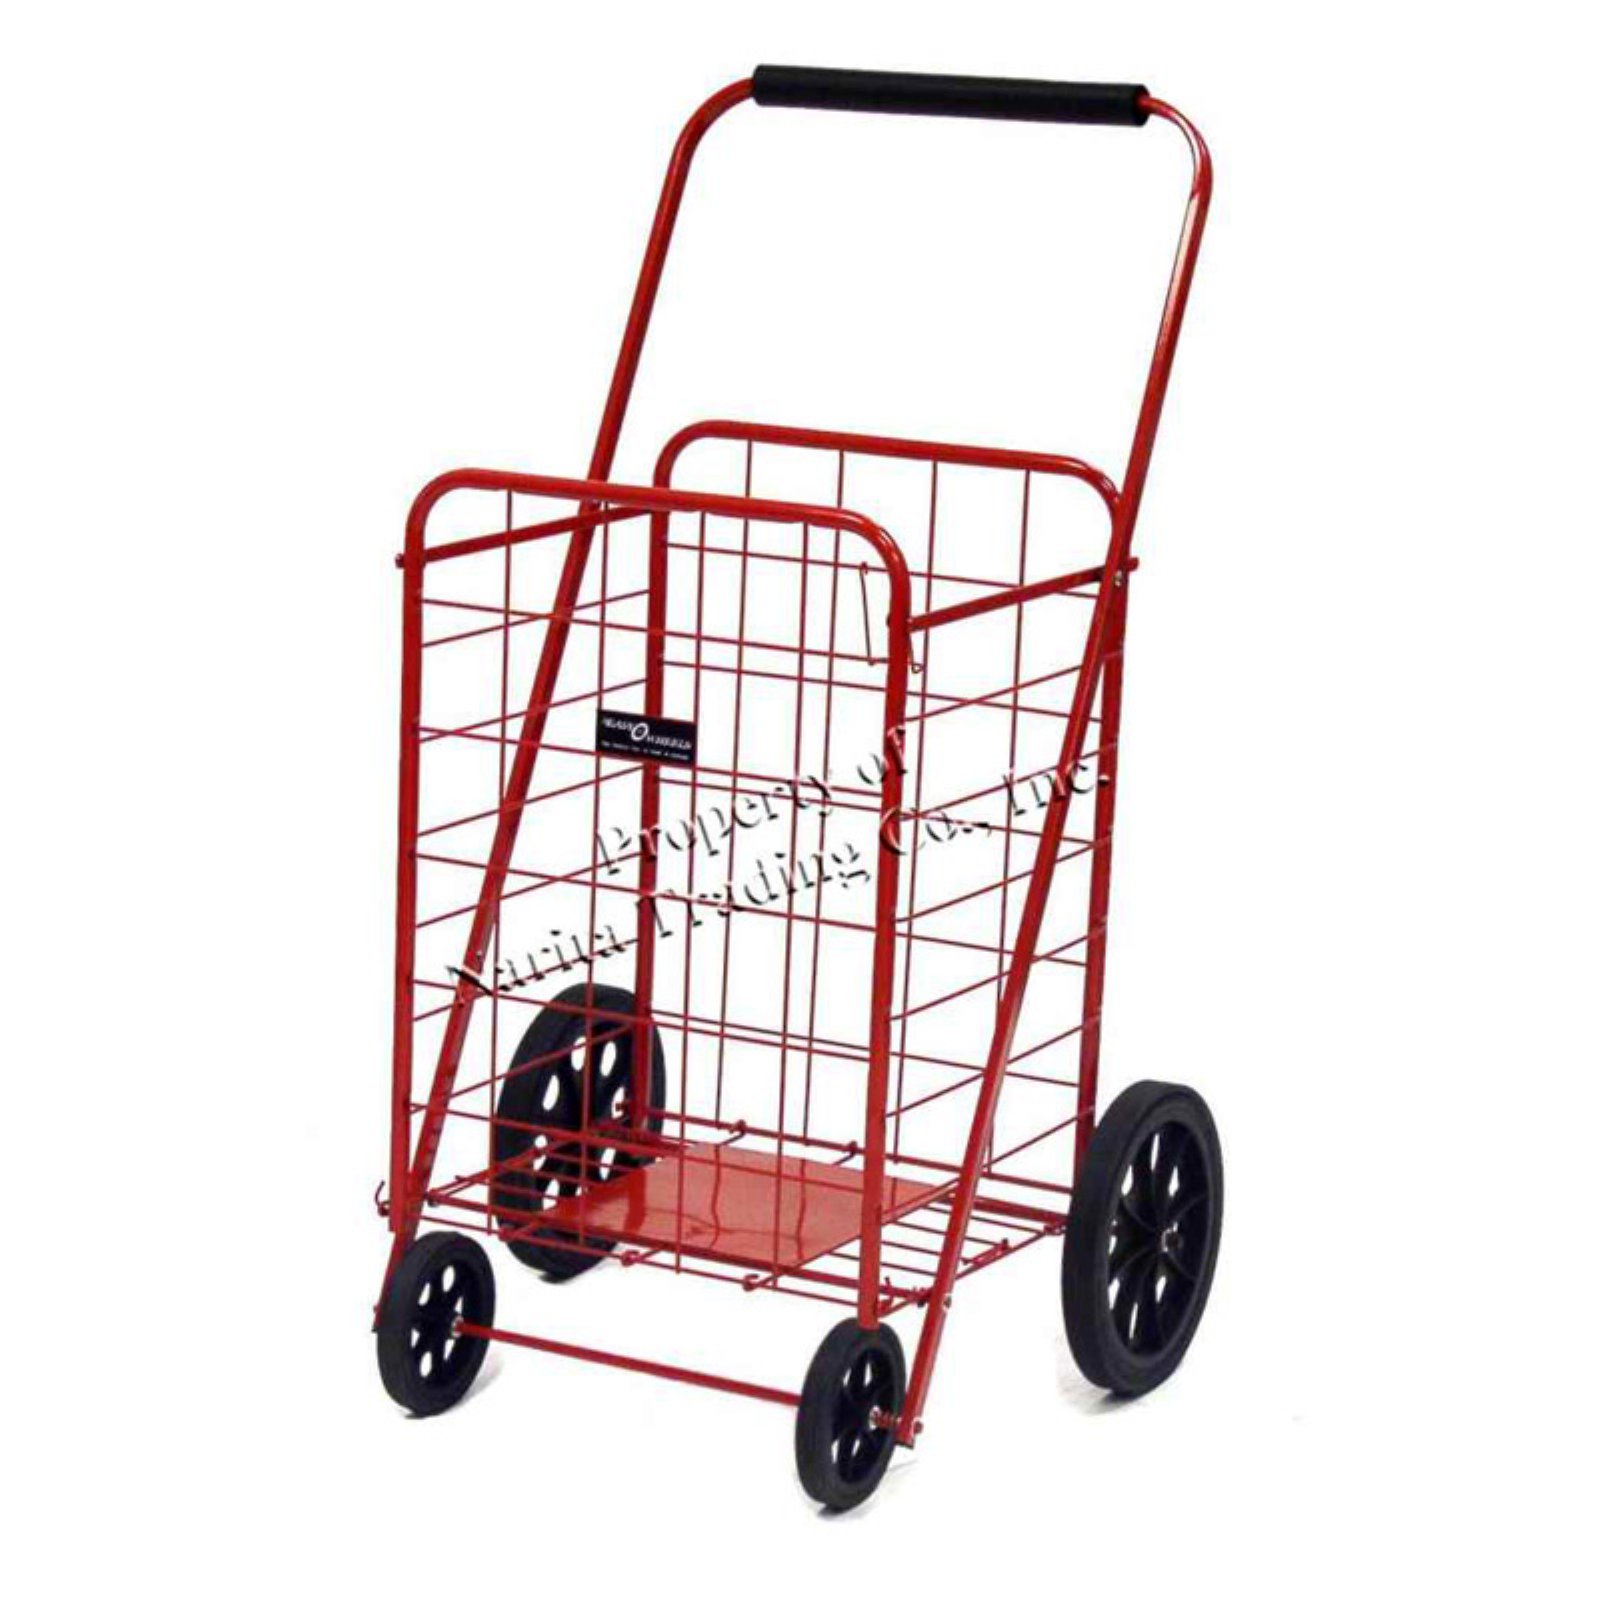 Easy Wheels Super Shopping Cart - Multiple Colors - image 2 of 2